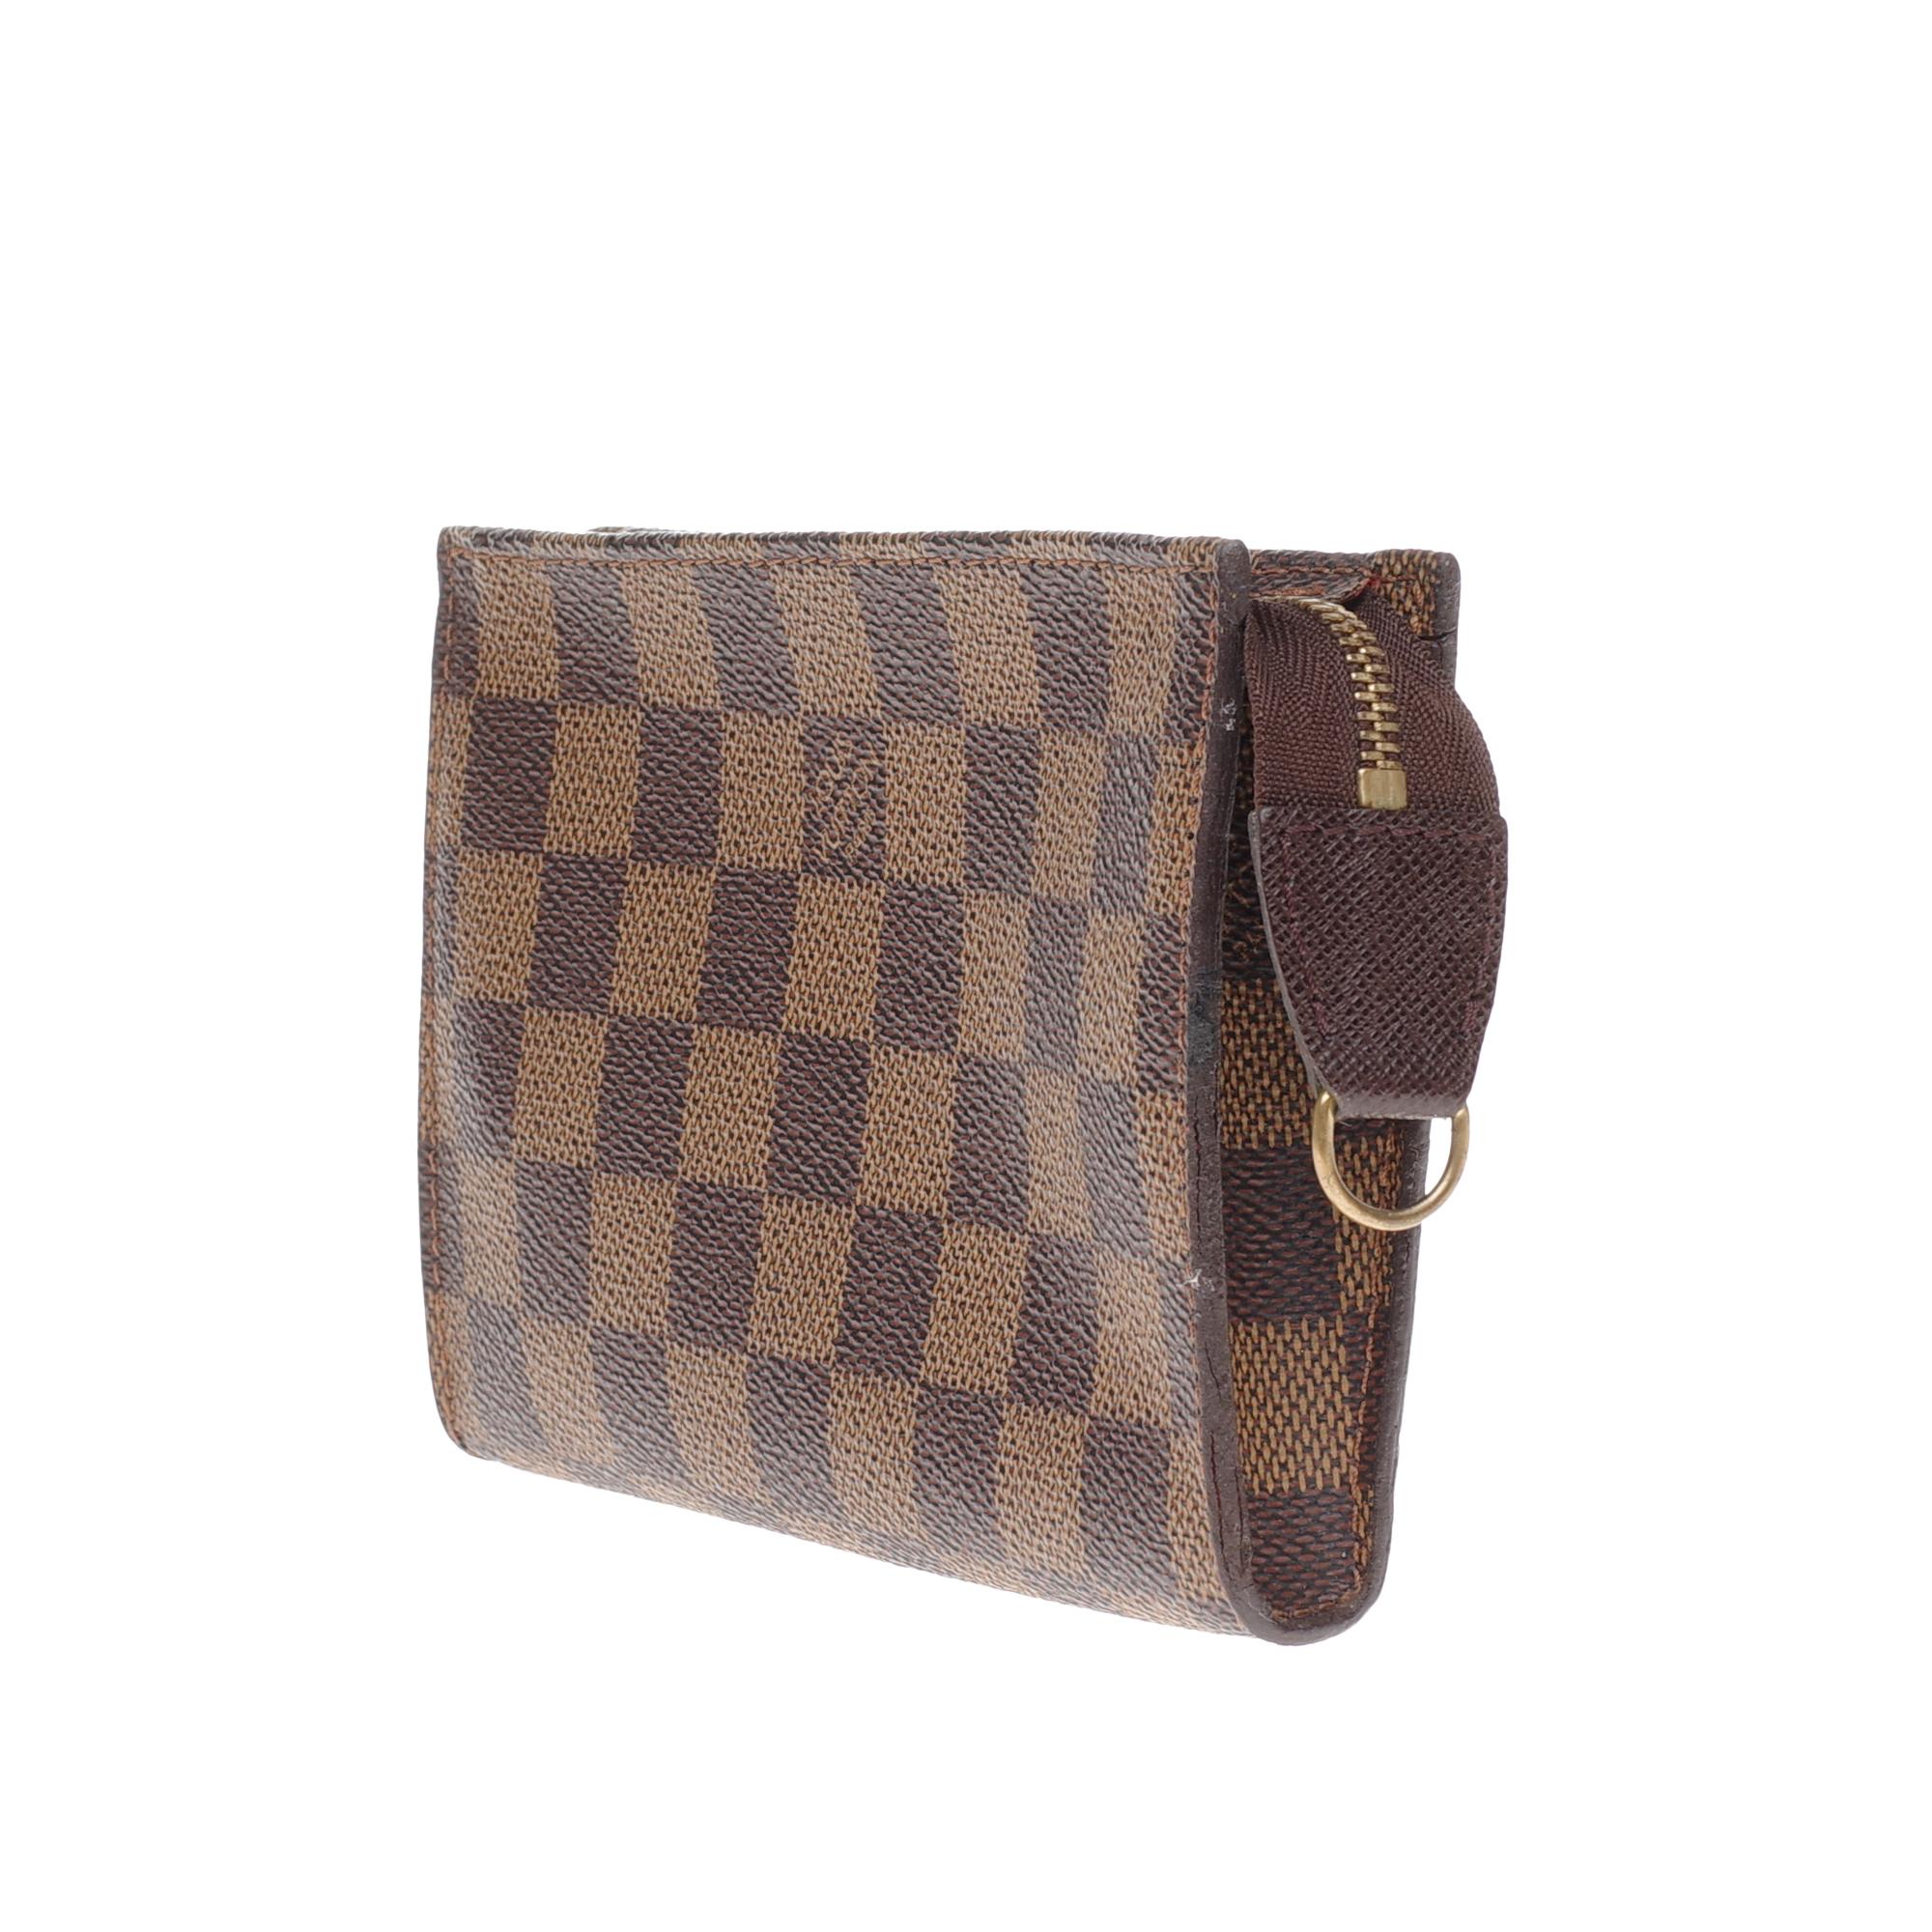 Brown Charming Louis Vuitton Make-Up bag in brown coated canvas